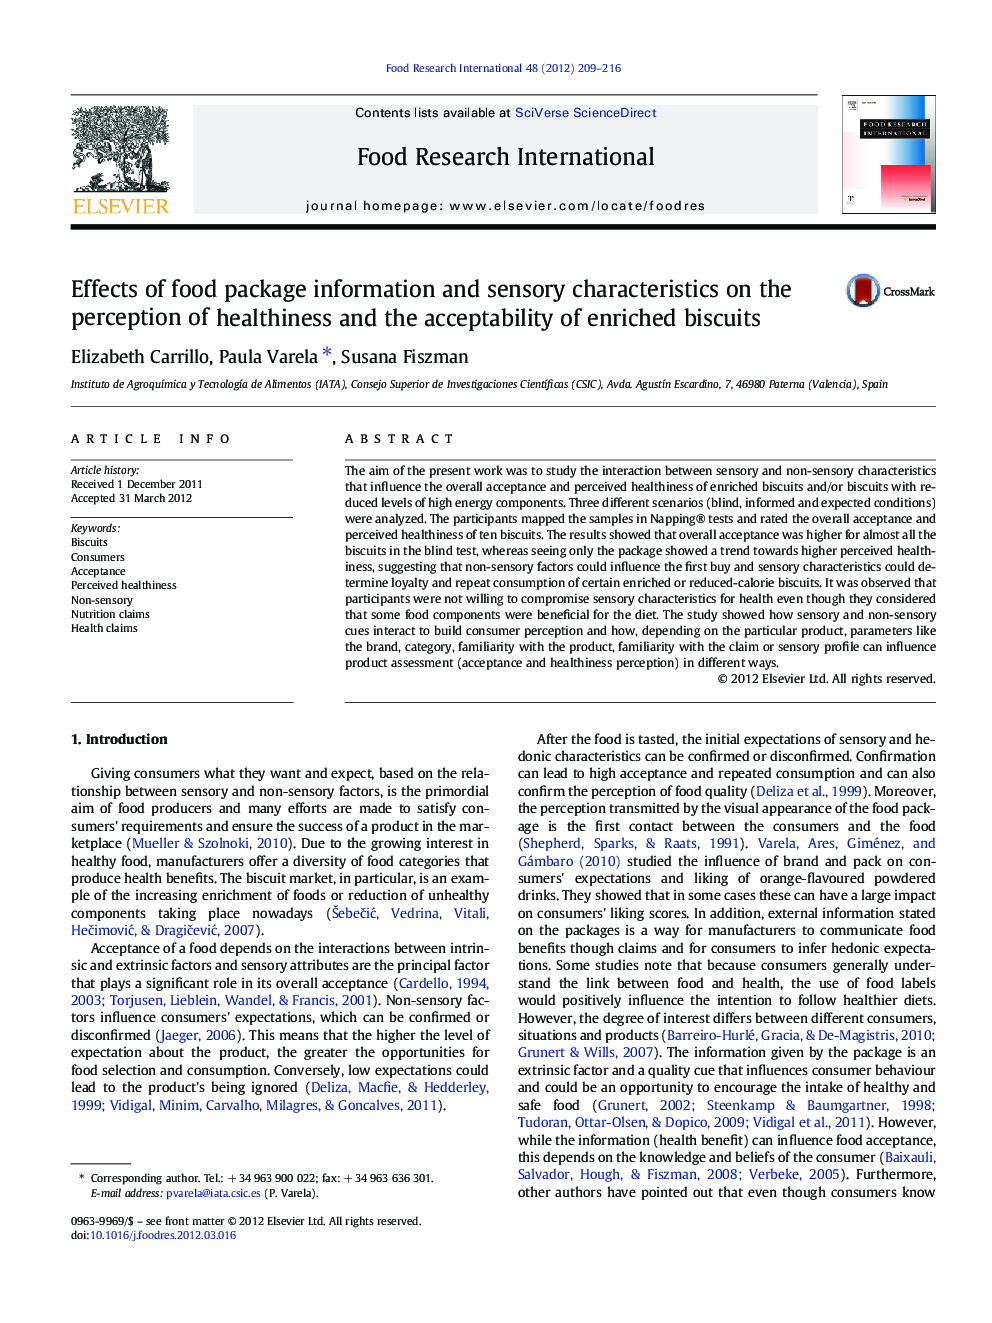 Effects of food package information and sensory characteristics on the perception of healthiness and the acceptability of enriched biscuits